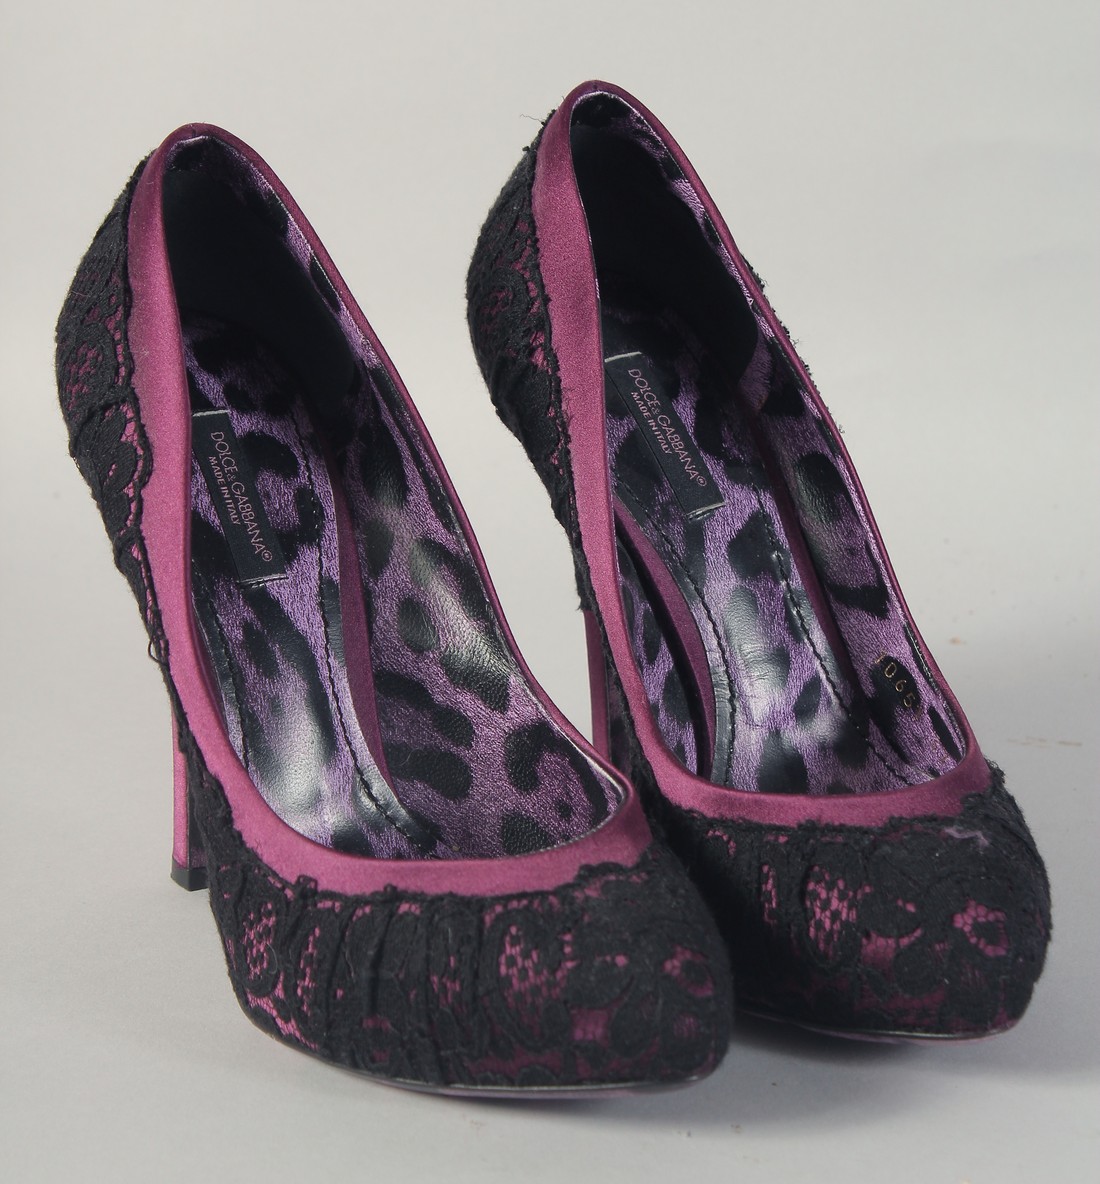 A PAIR OF DOLCE AND GABBANA BLACK AND PURPLE HIGH HEEL SHOES. Size 37.